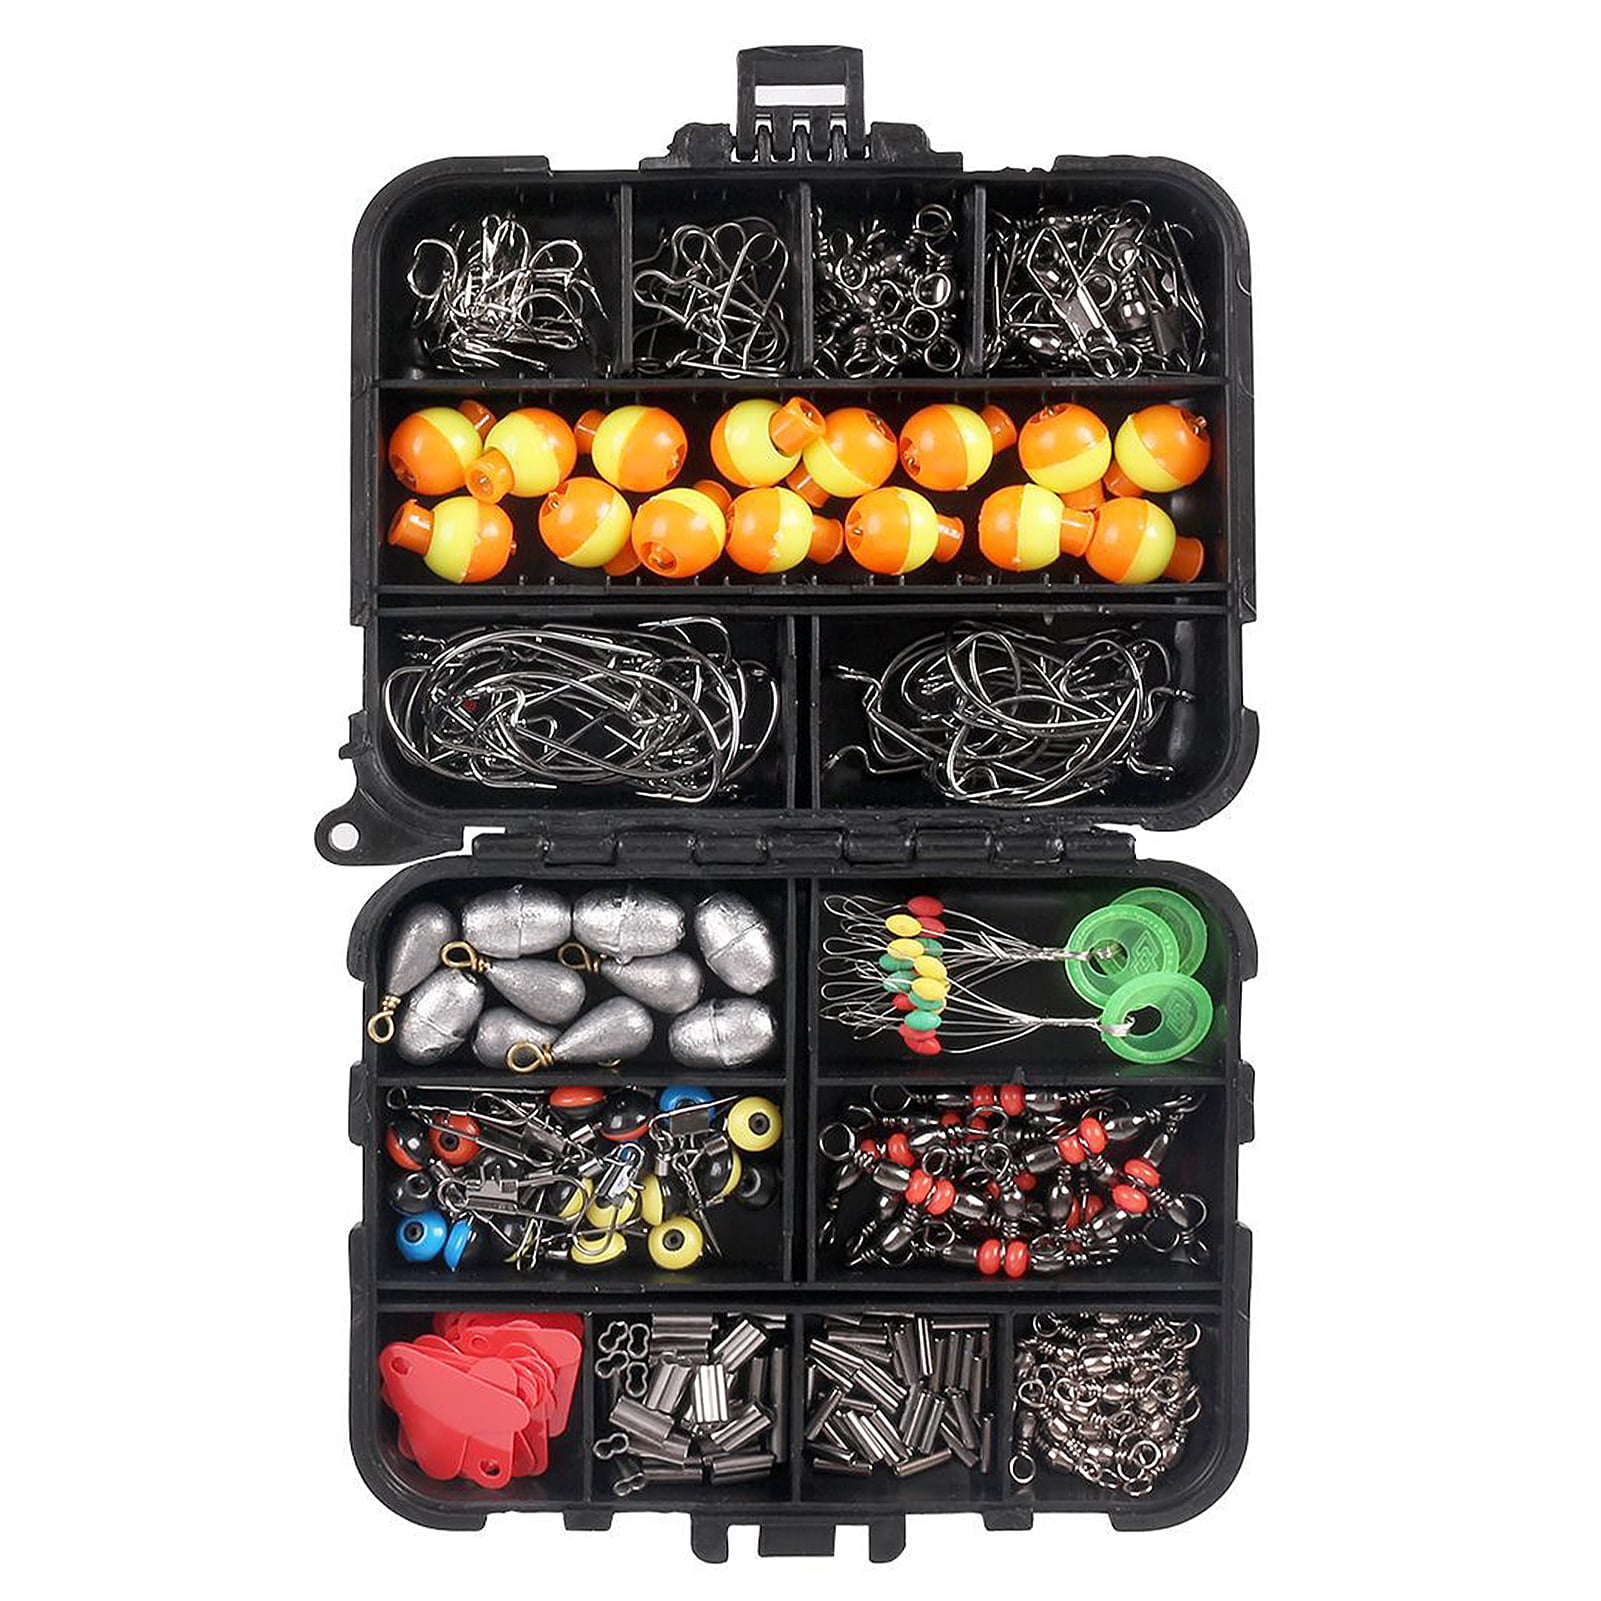  Fishing Accessories Kit, Fishing Set with Tackle Box, Fishing  Hooks, Weights, Jig Heads, O-Rings, Barrel Swivels, Fastlock Snaps, Fishing  Beads, Space Beans(Freshwater) : Sports & Outdoors